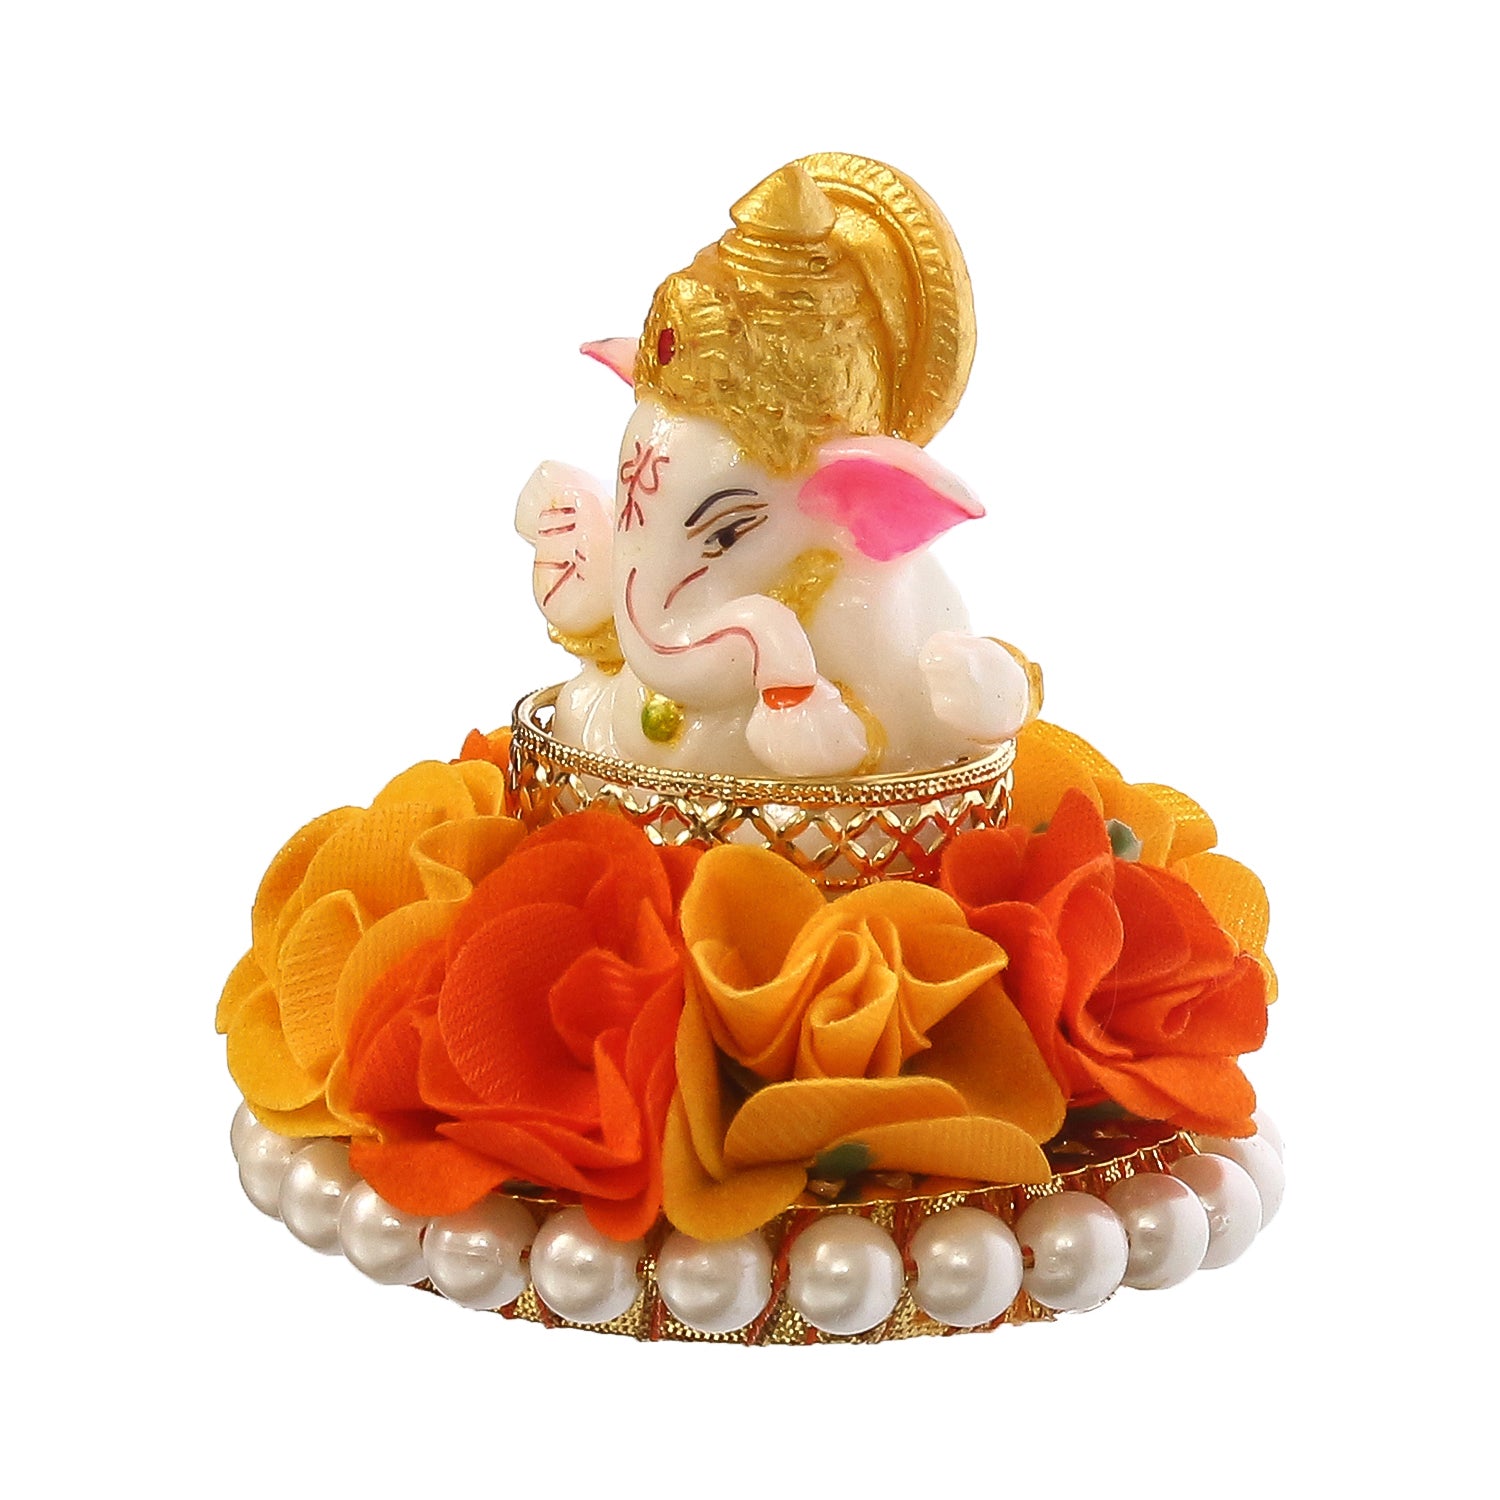 Lord Ganesha Idol On Decorative Handcrafted Orange And Yellow Flowers Plate 5